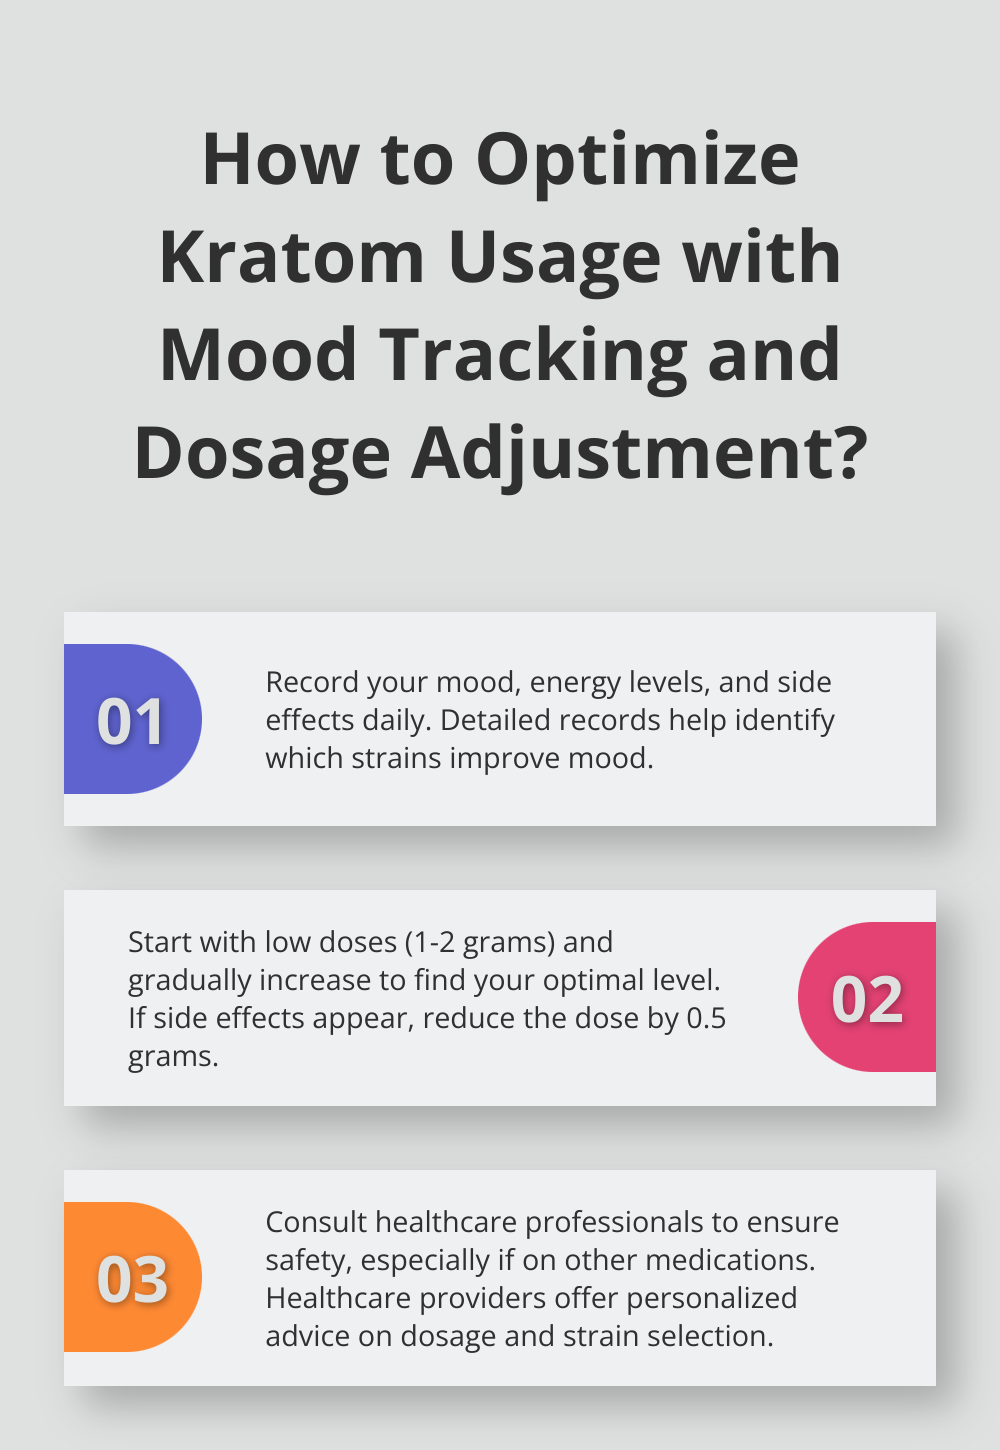 Fact - How to Optimize Kratom Usage with Mood Tracking and Dosage Adjustment?